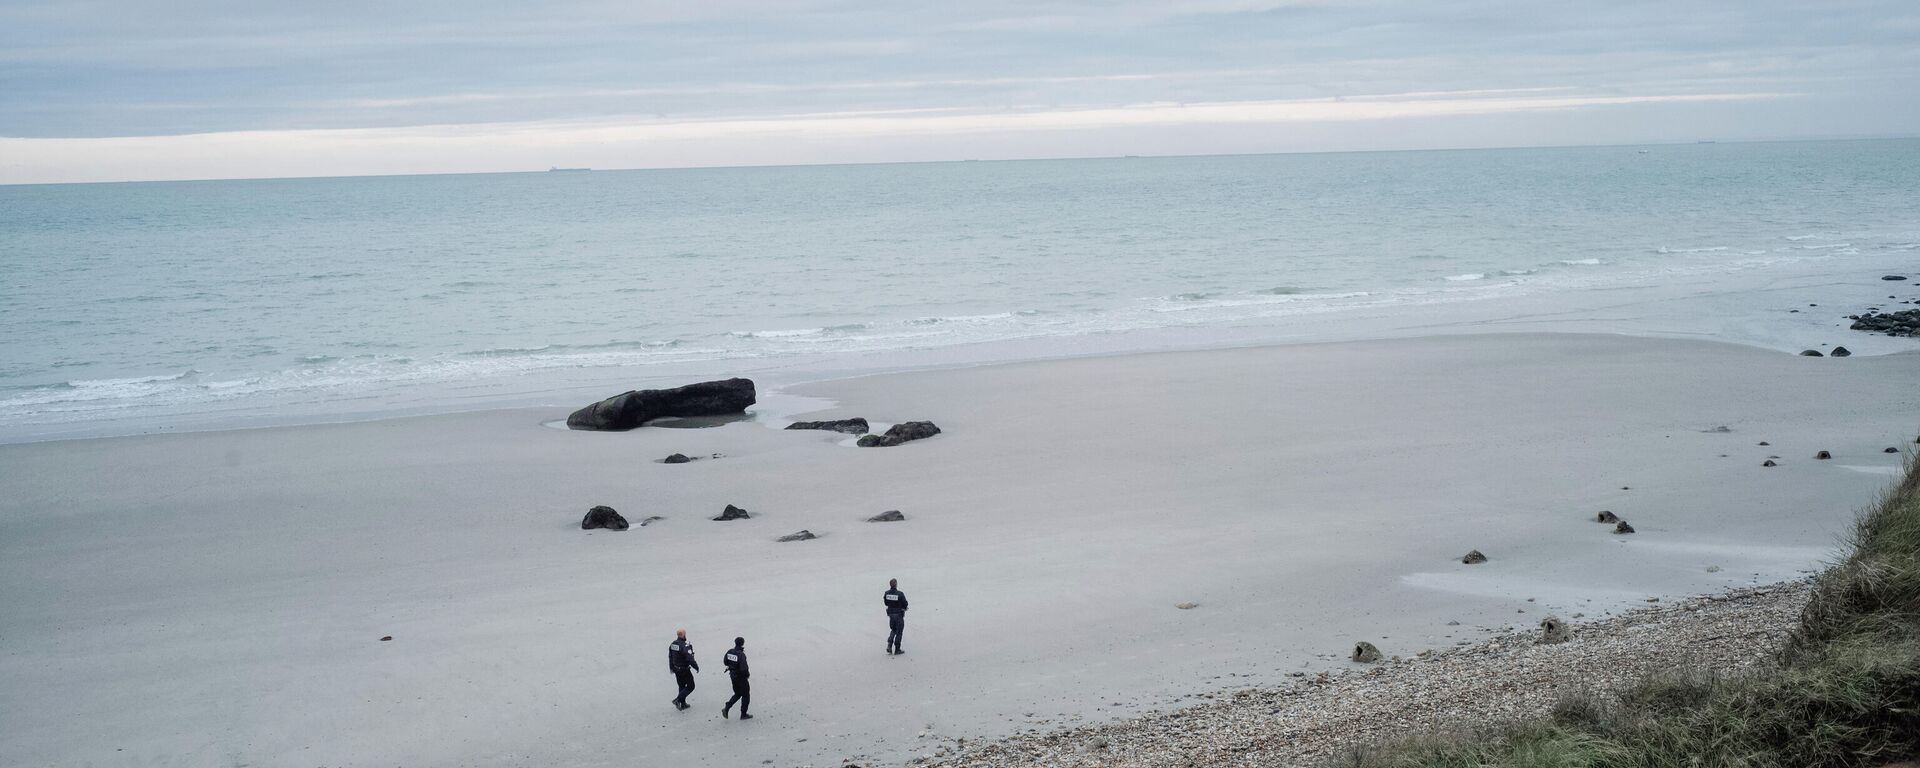 French police officers patrol on the beach in the searcher migrants in Wimereux, northern France, Wednesday, Nov.17, 2021. Several migrants died and others were injured Wednesday Nov.24, 2021 when their boat capsized off Calais in the English Channel as they tried to cross from France to Britain, authorities said. British and French authorities were searching the area using helicopters and coast guard vessels, according to the French maritime agency for the region. - Sputnik International, 1920, 13.11.2022